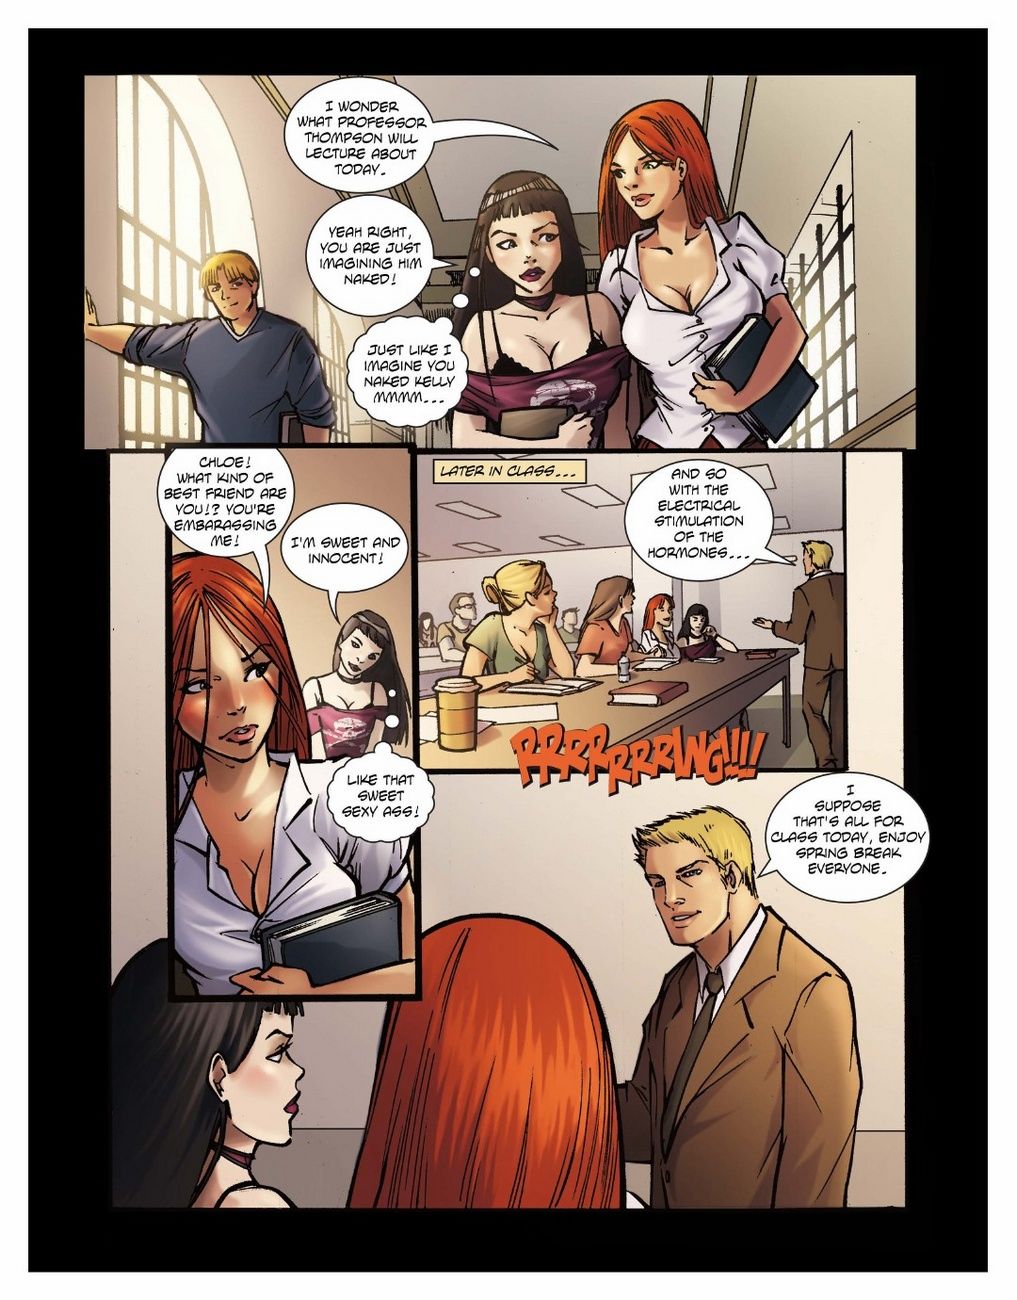 Bigger Better Clones 1 page 2